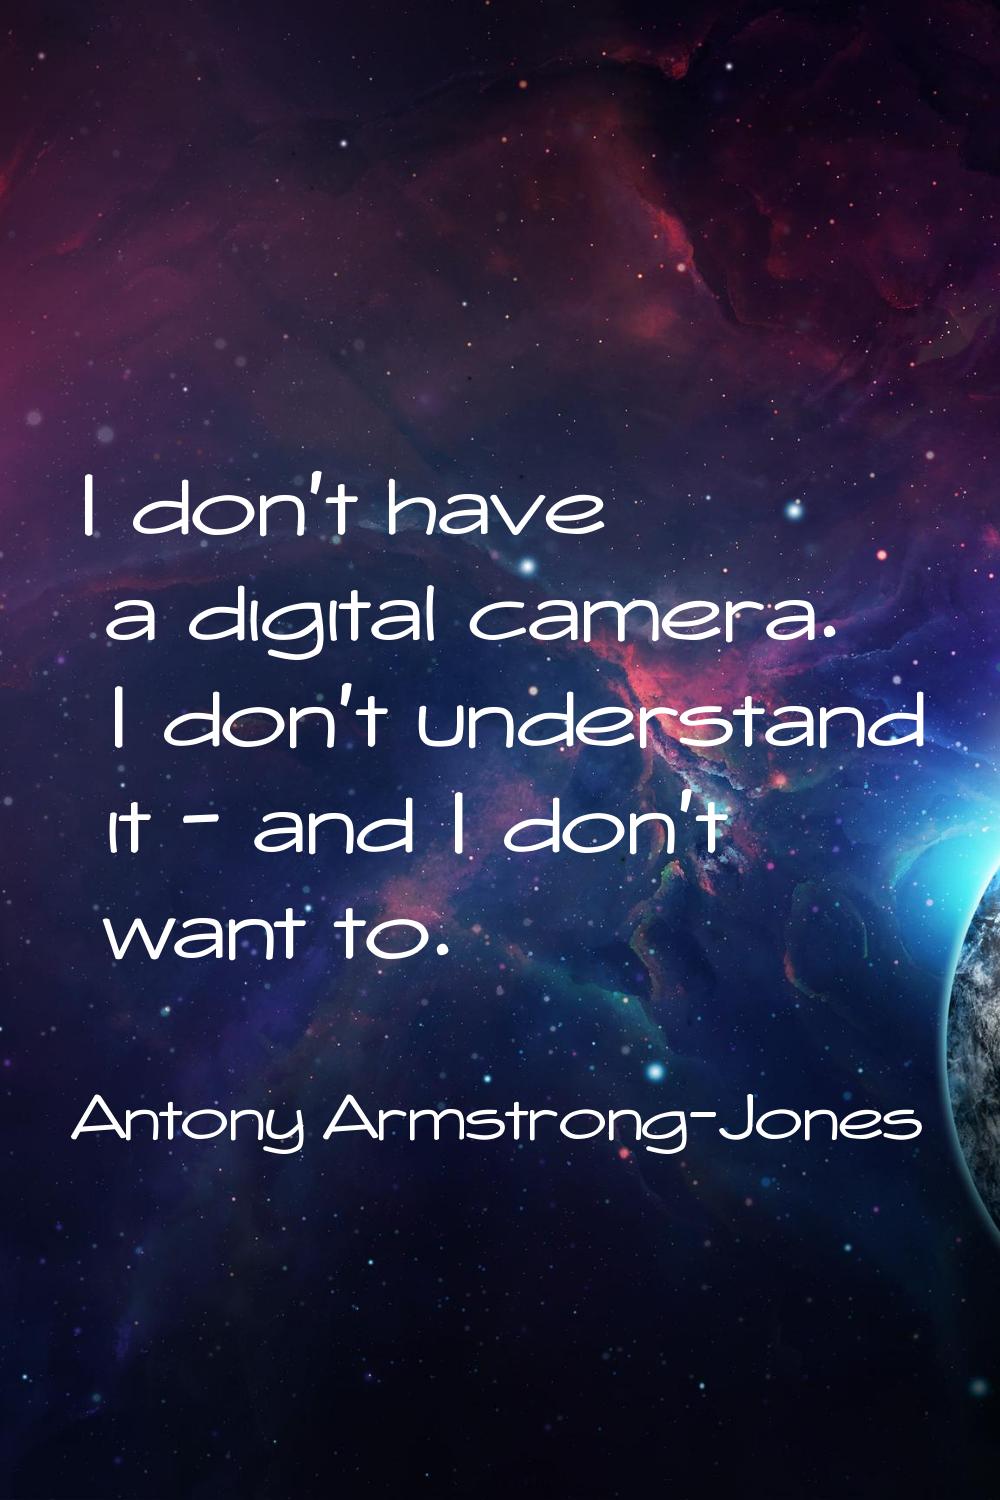 I don't have a digital camera. I don't understand it - and I don't want to.